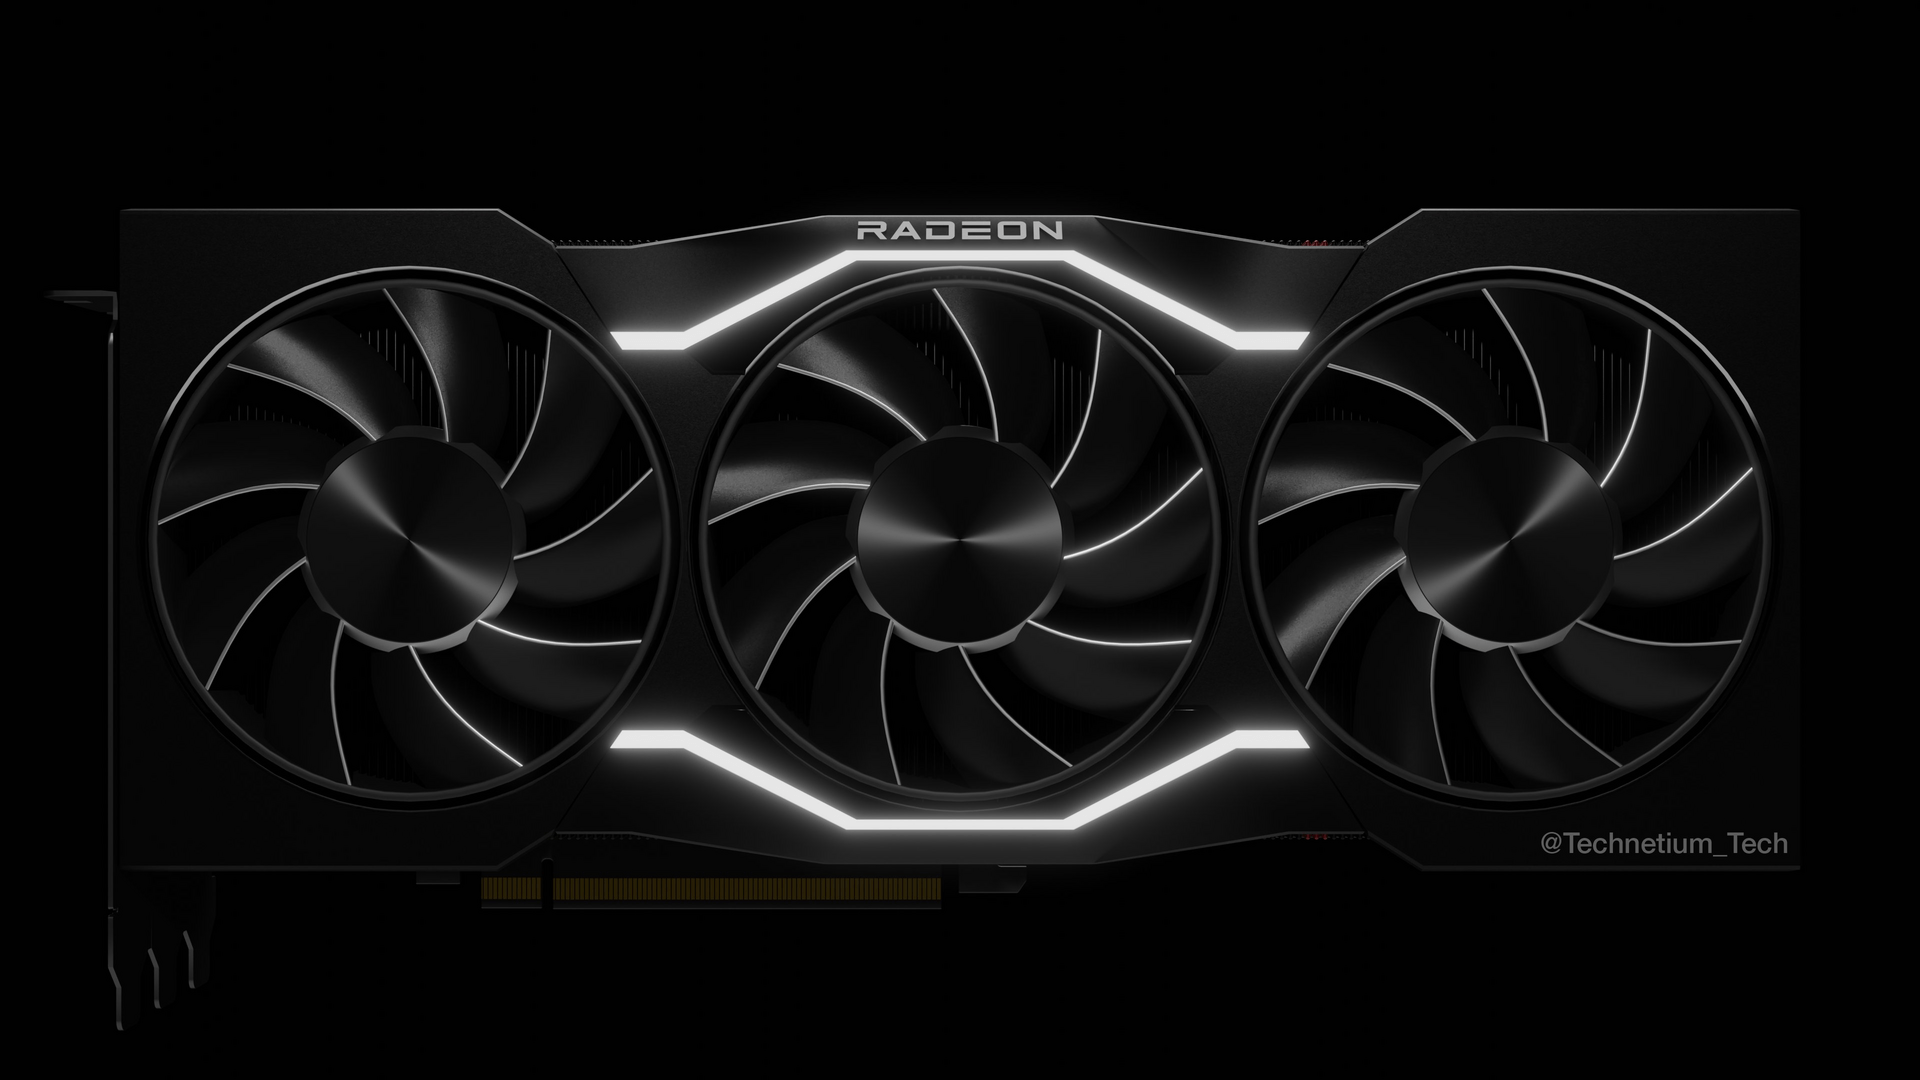 Renderings should show the possible design of the Radeon RX 7000 series